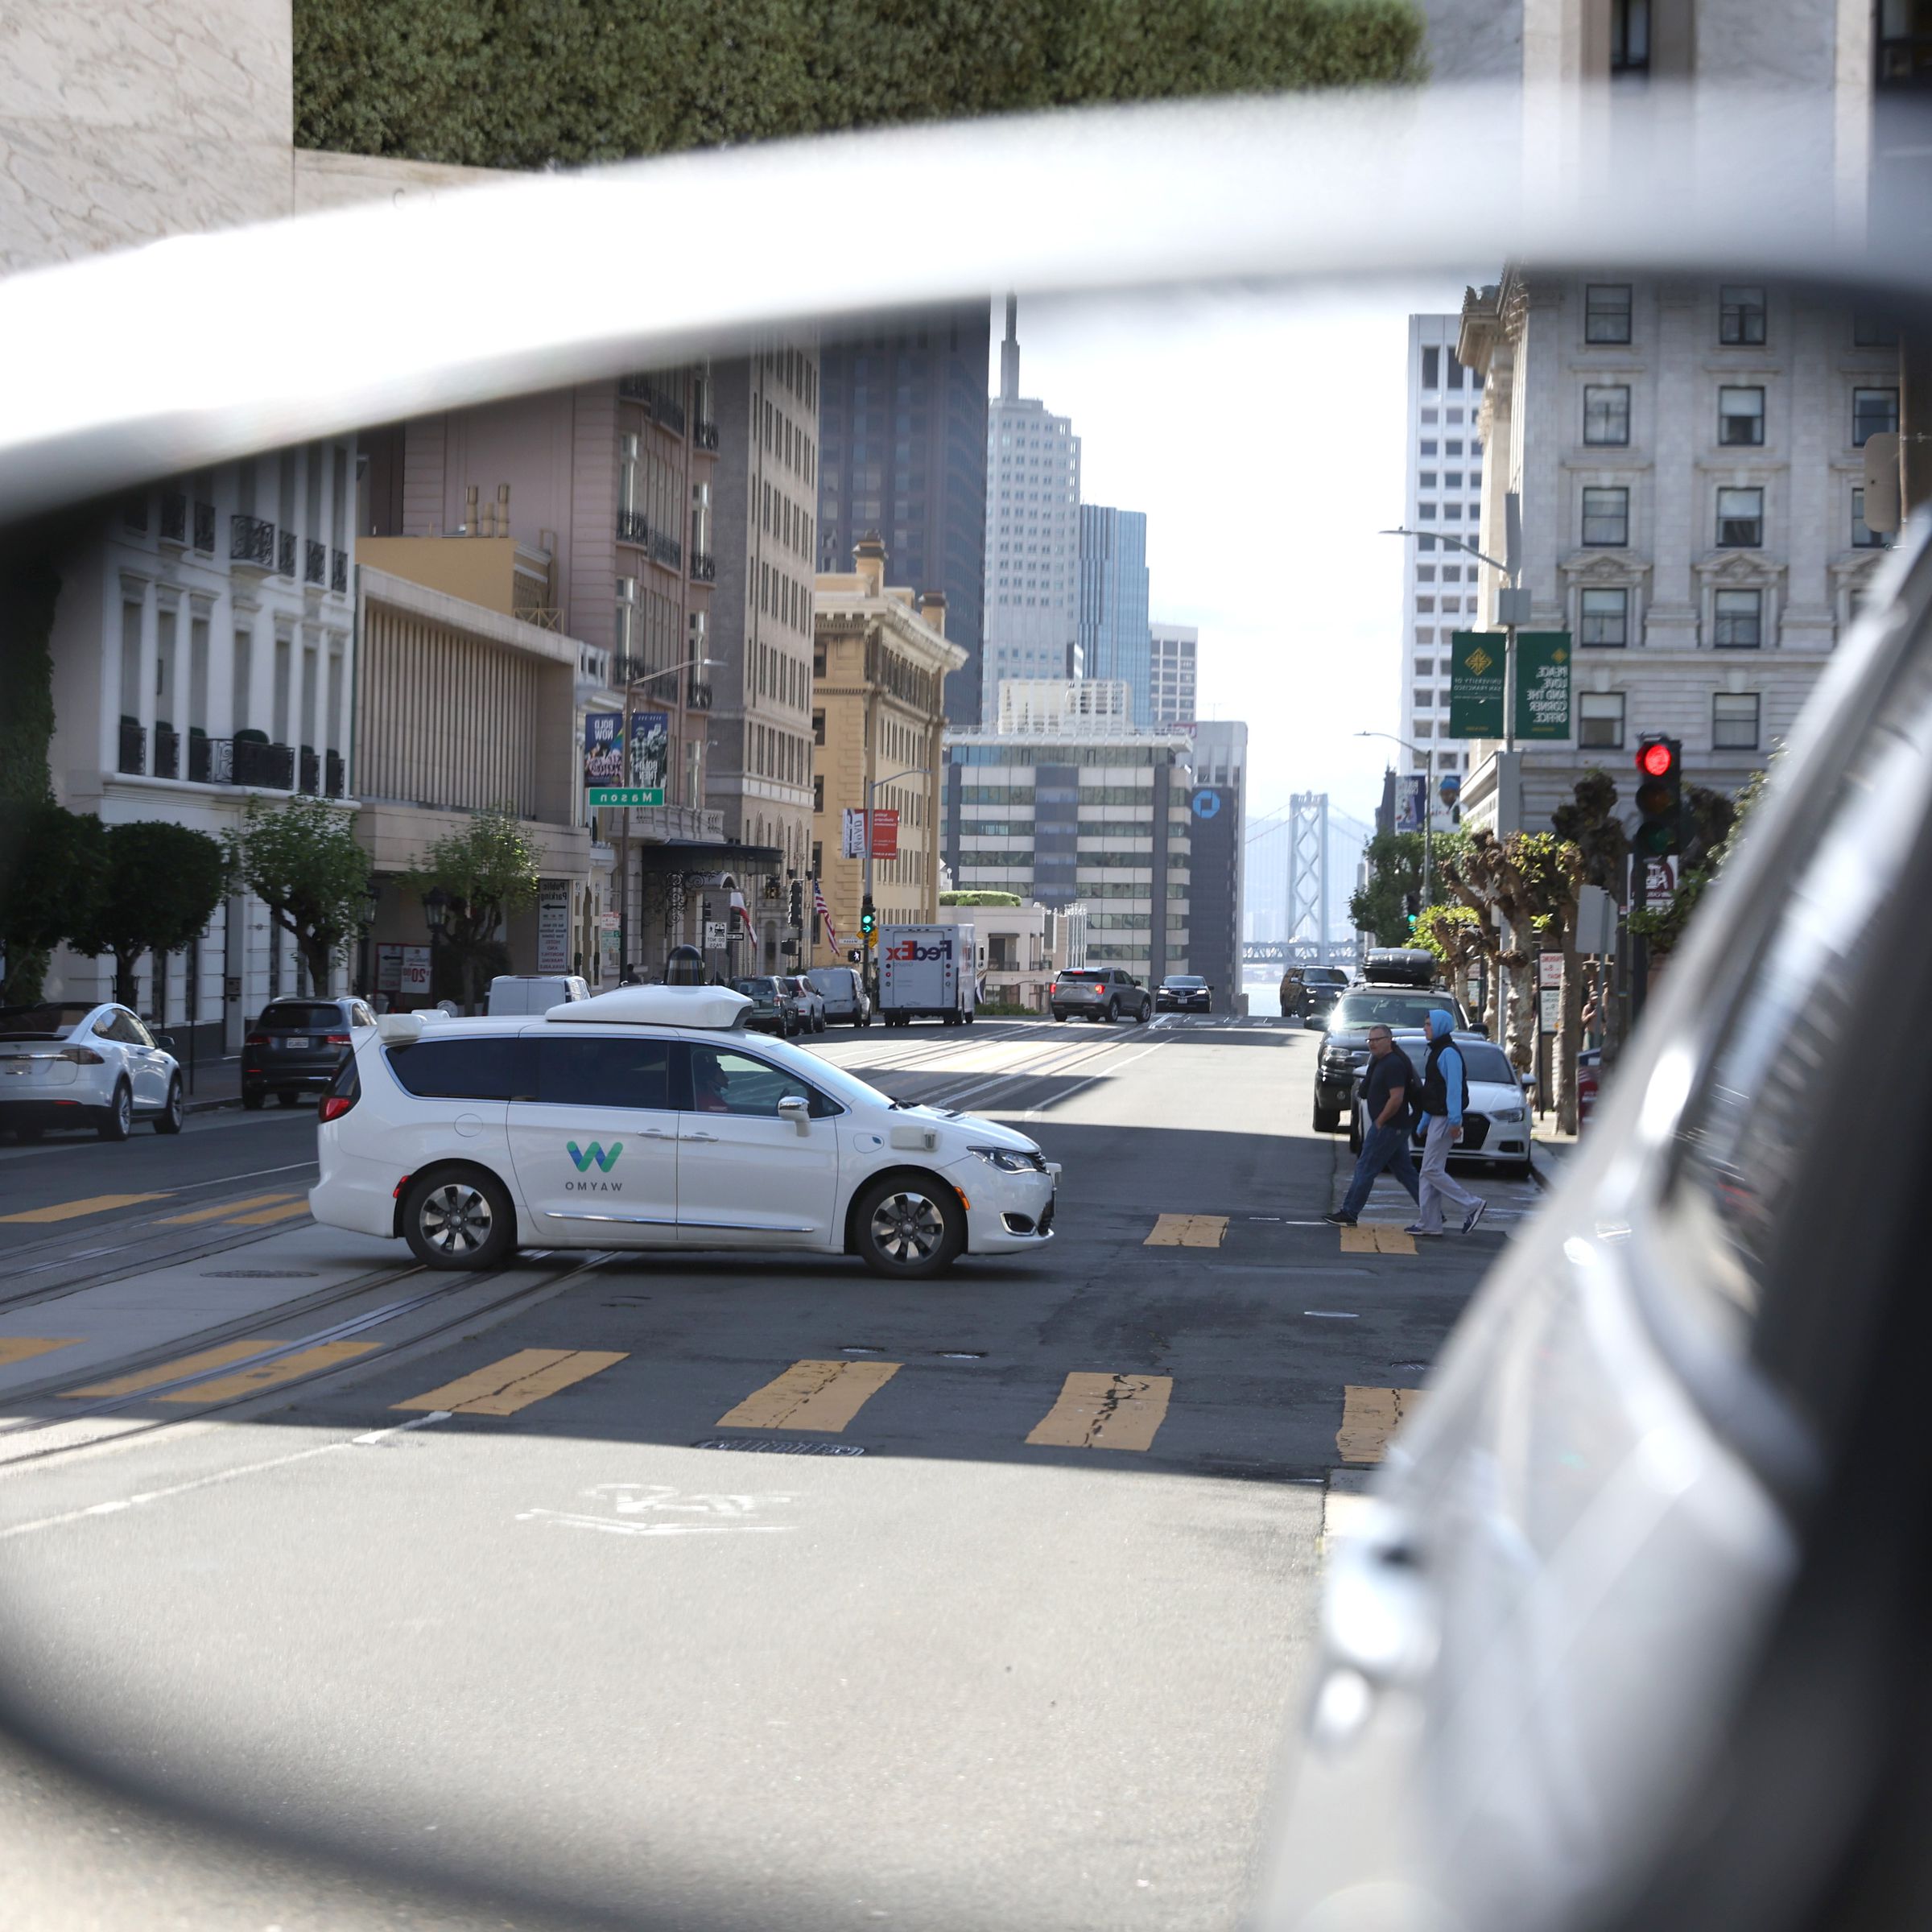 A Waymo autonomous vehicle is seen reflected in a mirror as it drives along California Street in San Francisco